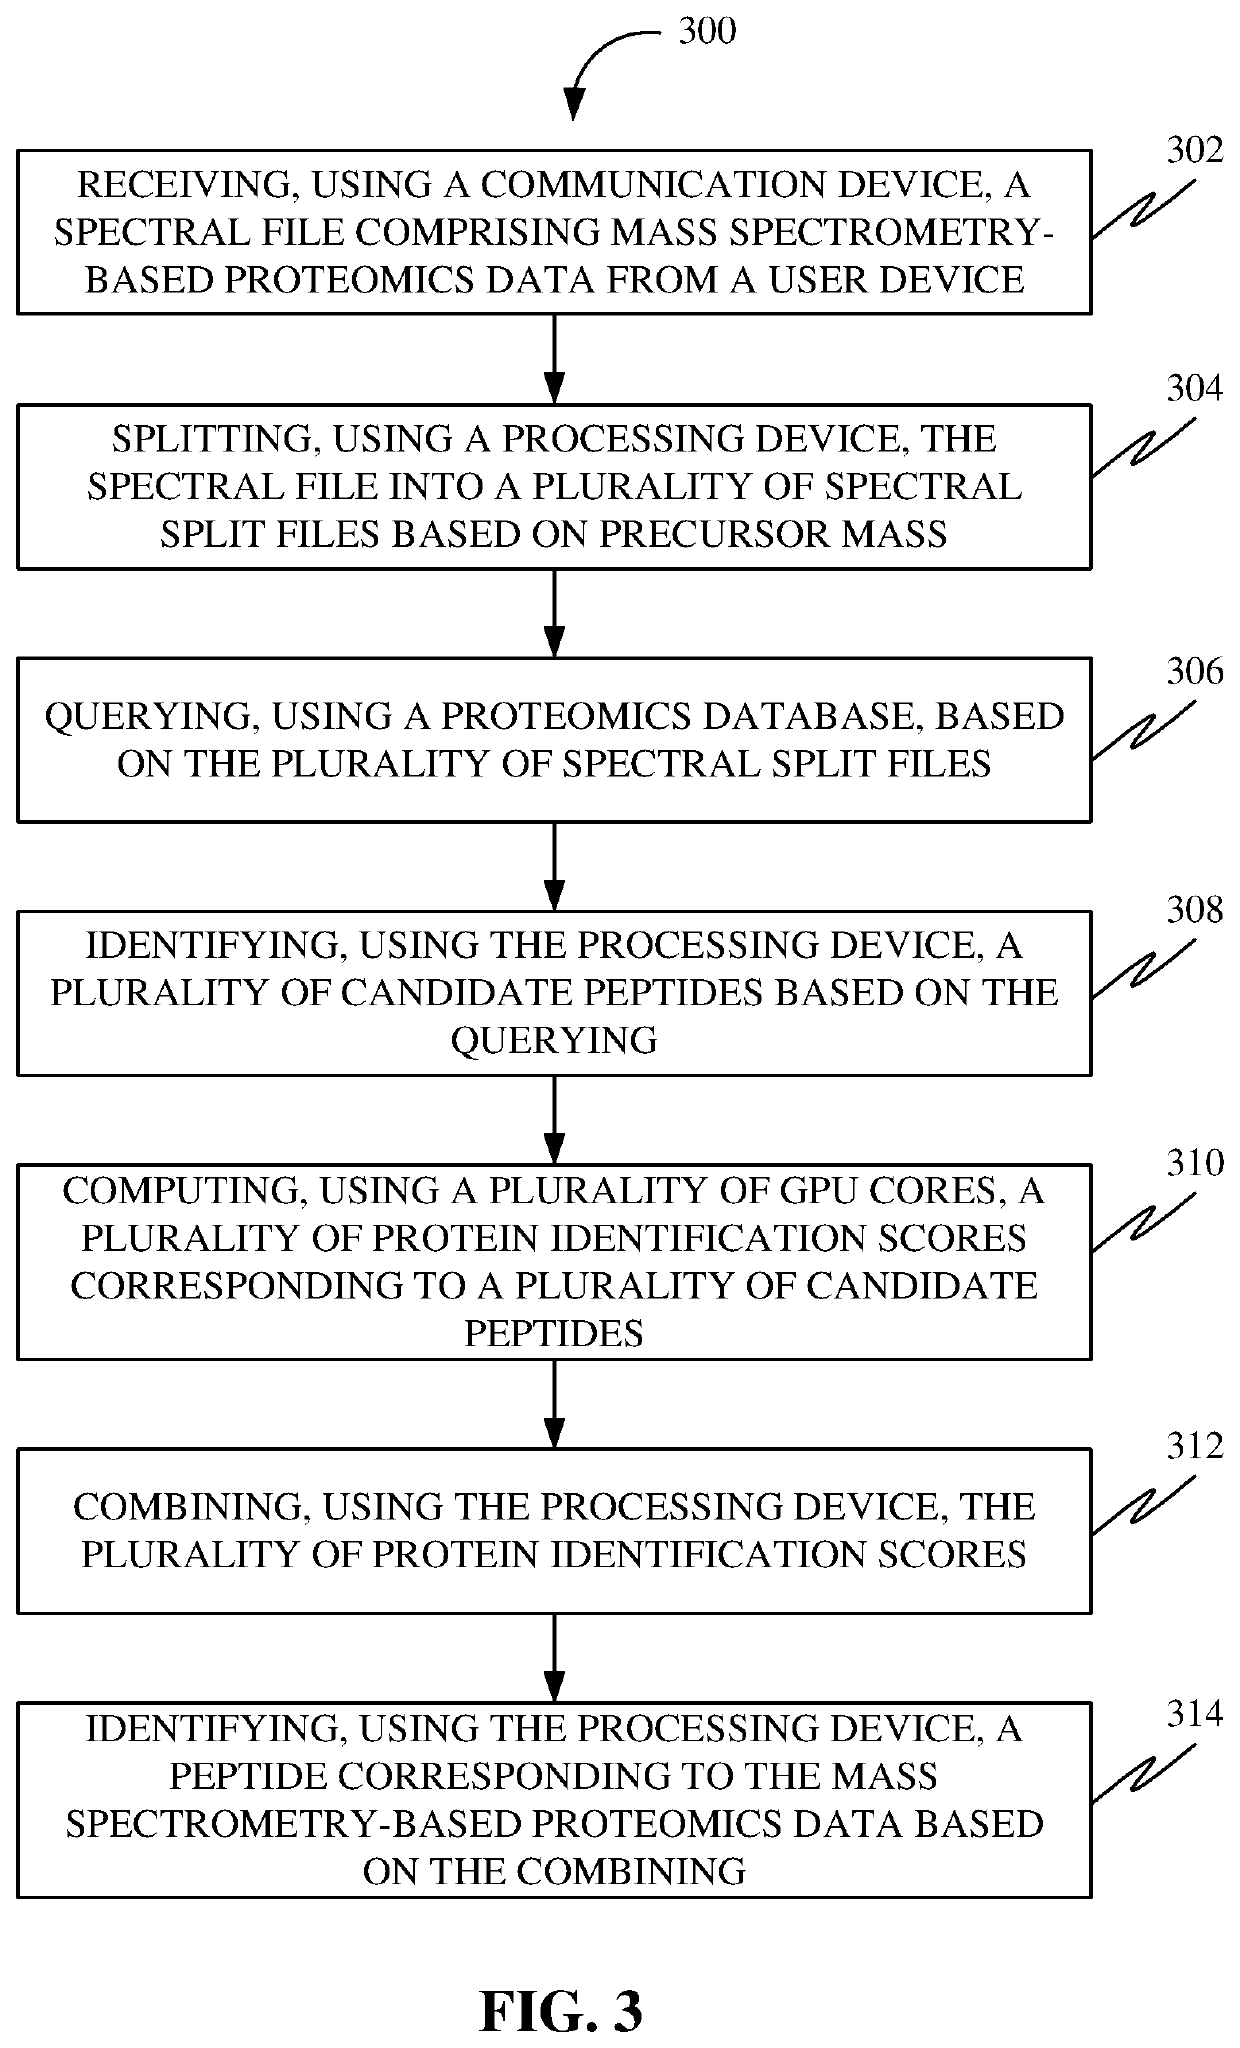 Methods, systems, apparatuses and devices for accelerating execution of a search query for peptide identification